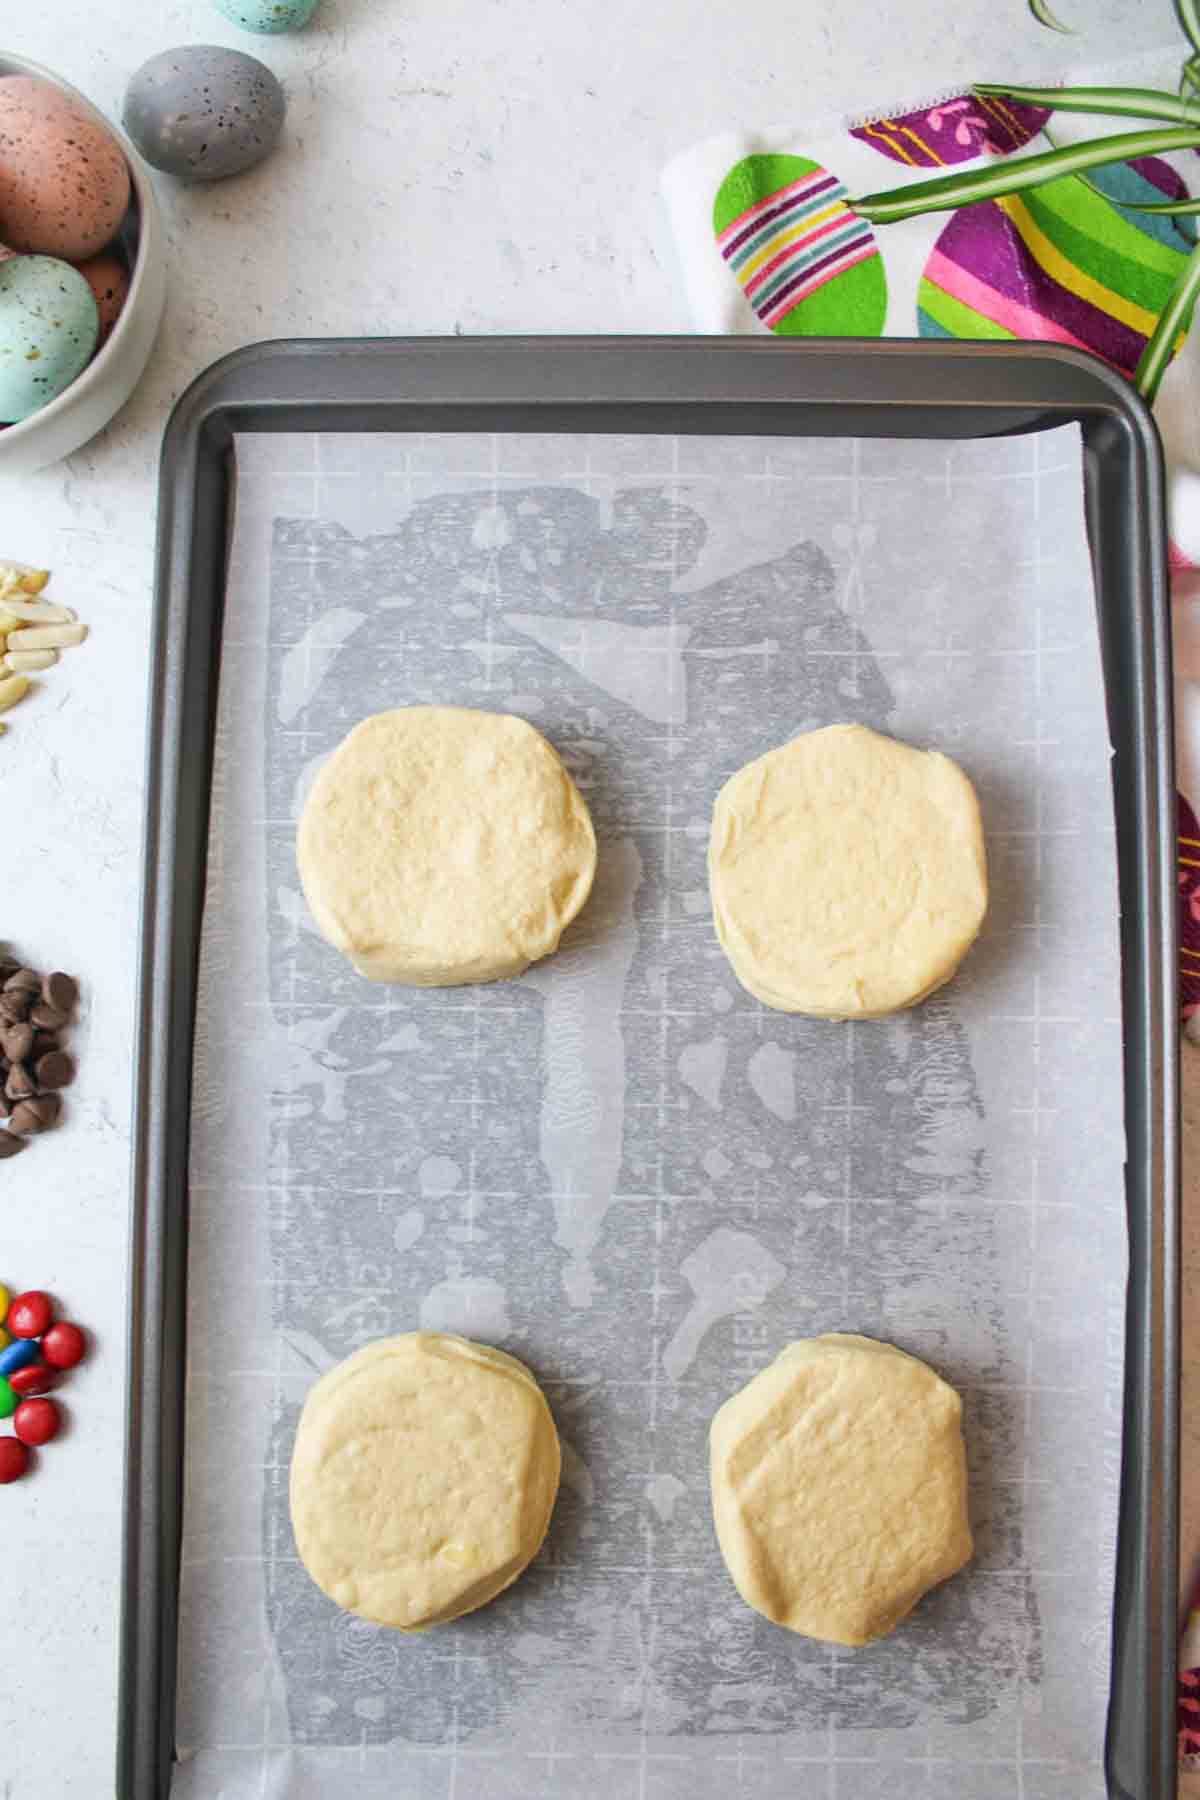 4 whole biscuits on a parchment lined baking sheet